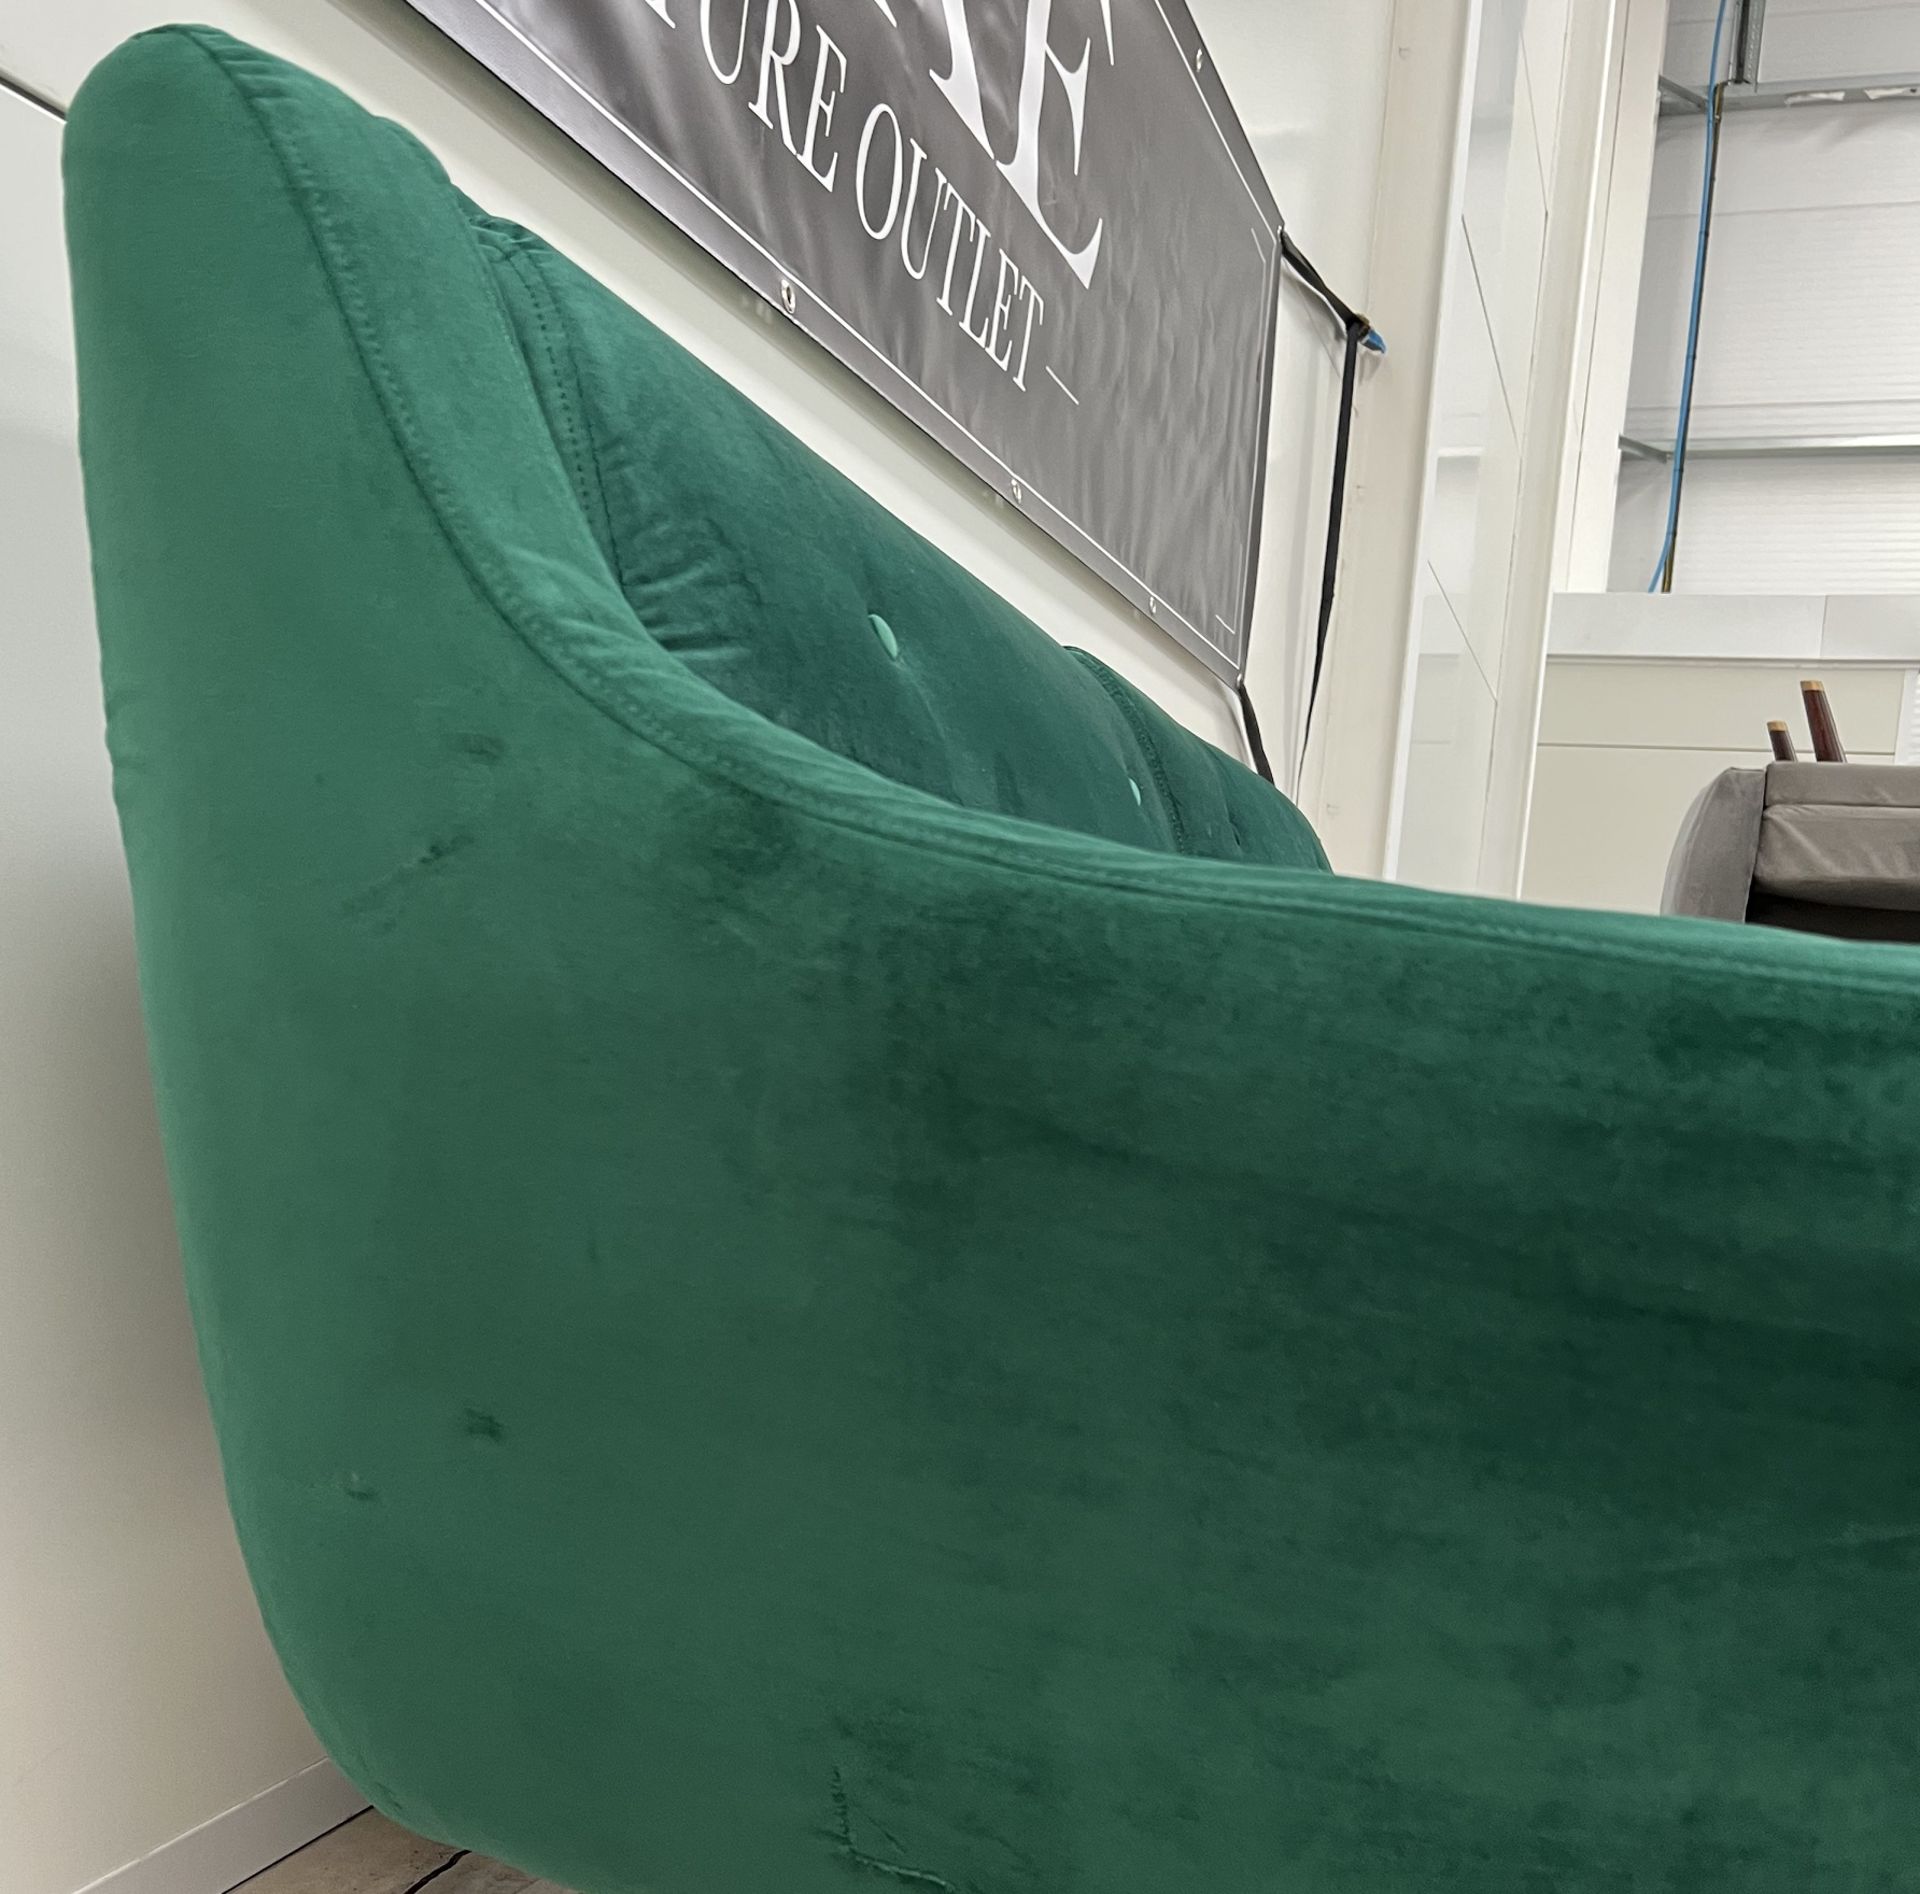 Lance Three Seater Sofa In Green Velvet Legs Finished In Black Legs This Welcoming Shape Is Hugged - Image 4 of 4